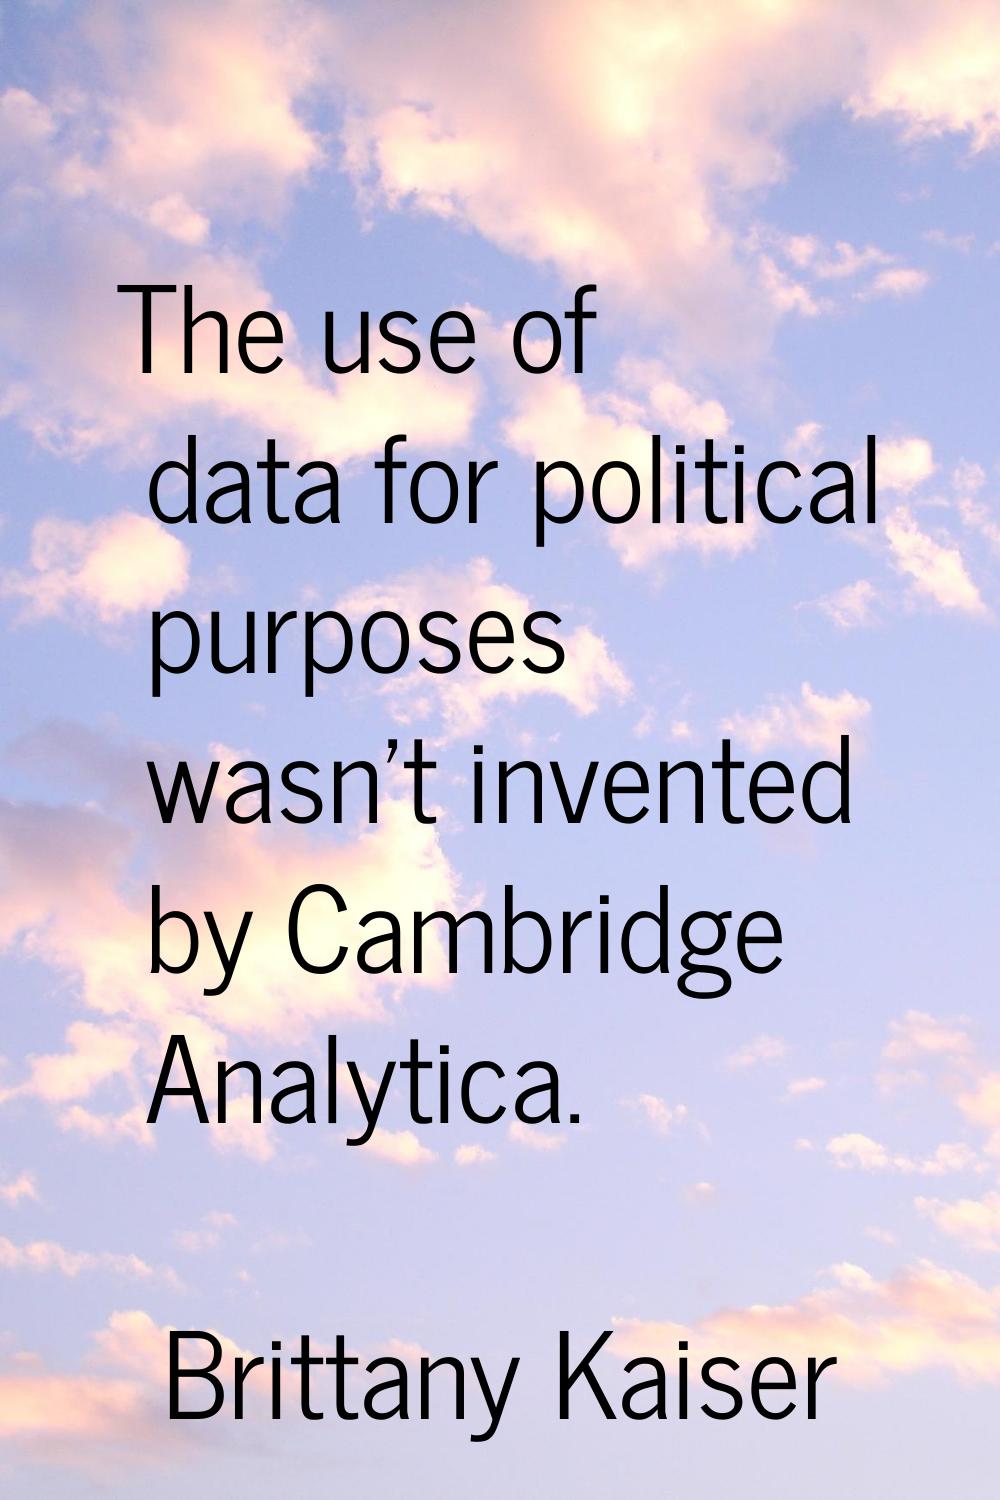 The use of data for political purposes wasn't invented by Cambridge Analytica.